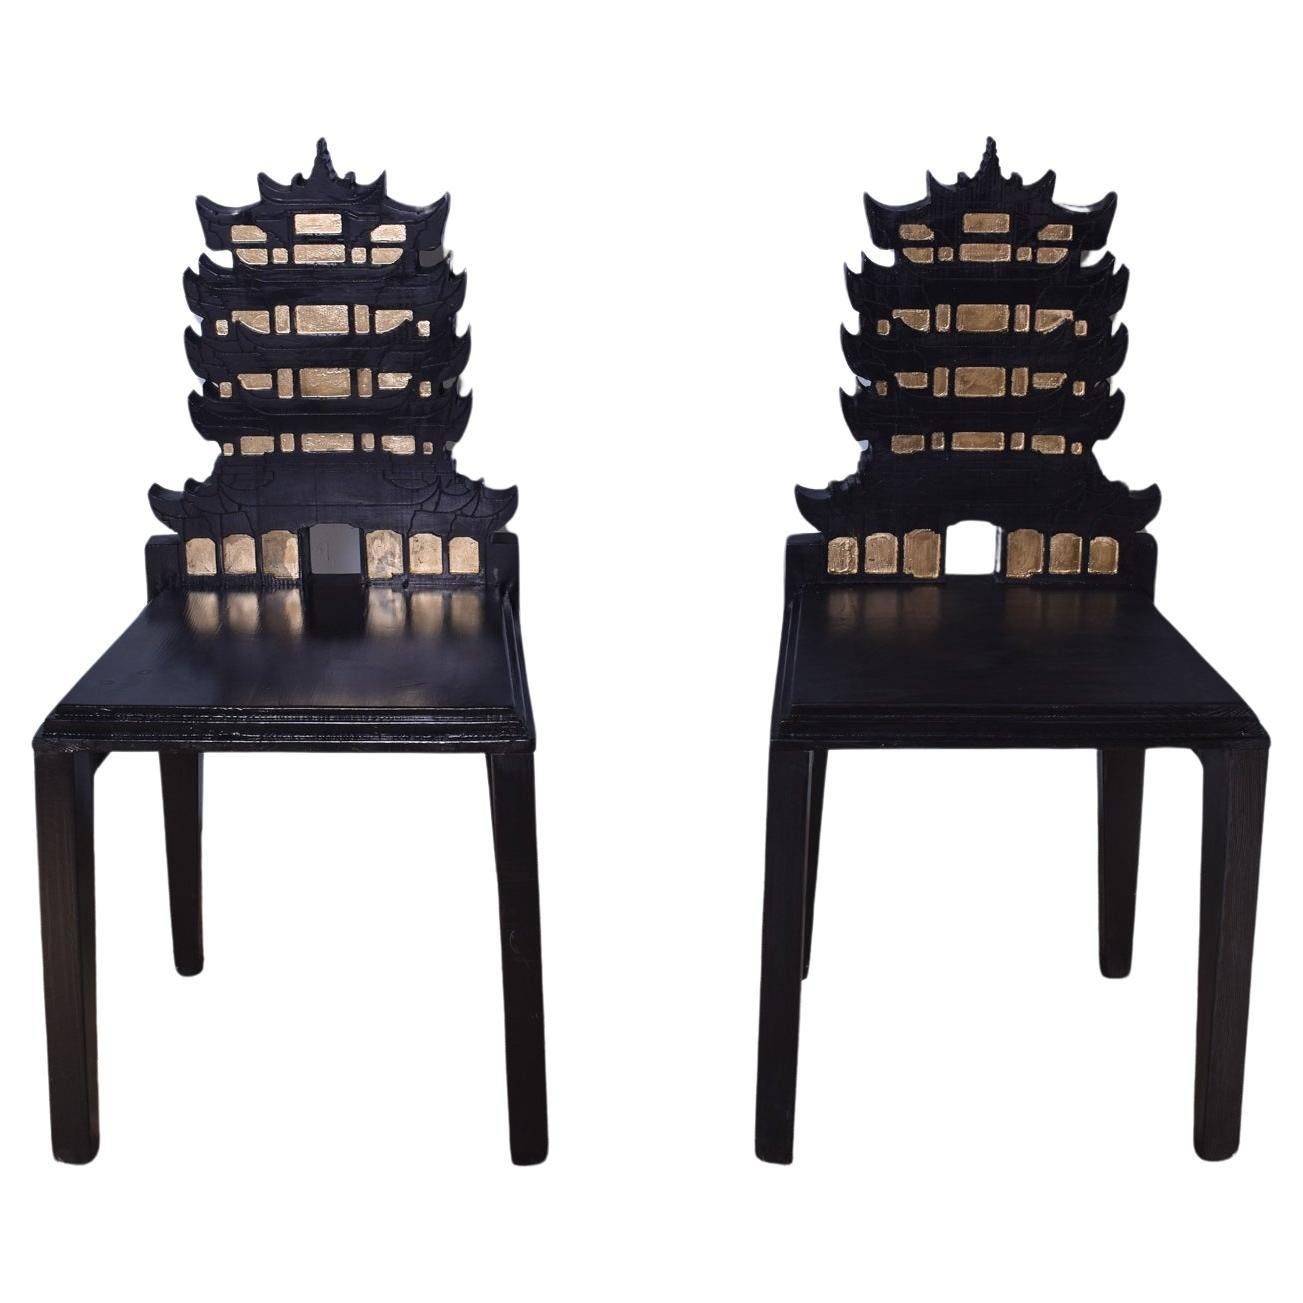 An ornate pair of Chinese Pagoda chairs by the Italian designer Cosimo De Vita.

The chairs are hand crafted in Florence from solid Fir wood and finished in a black paint with gold leaf detail, both chairs are signed and dated by Cosimo De